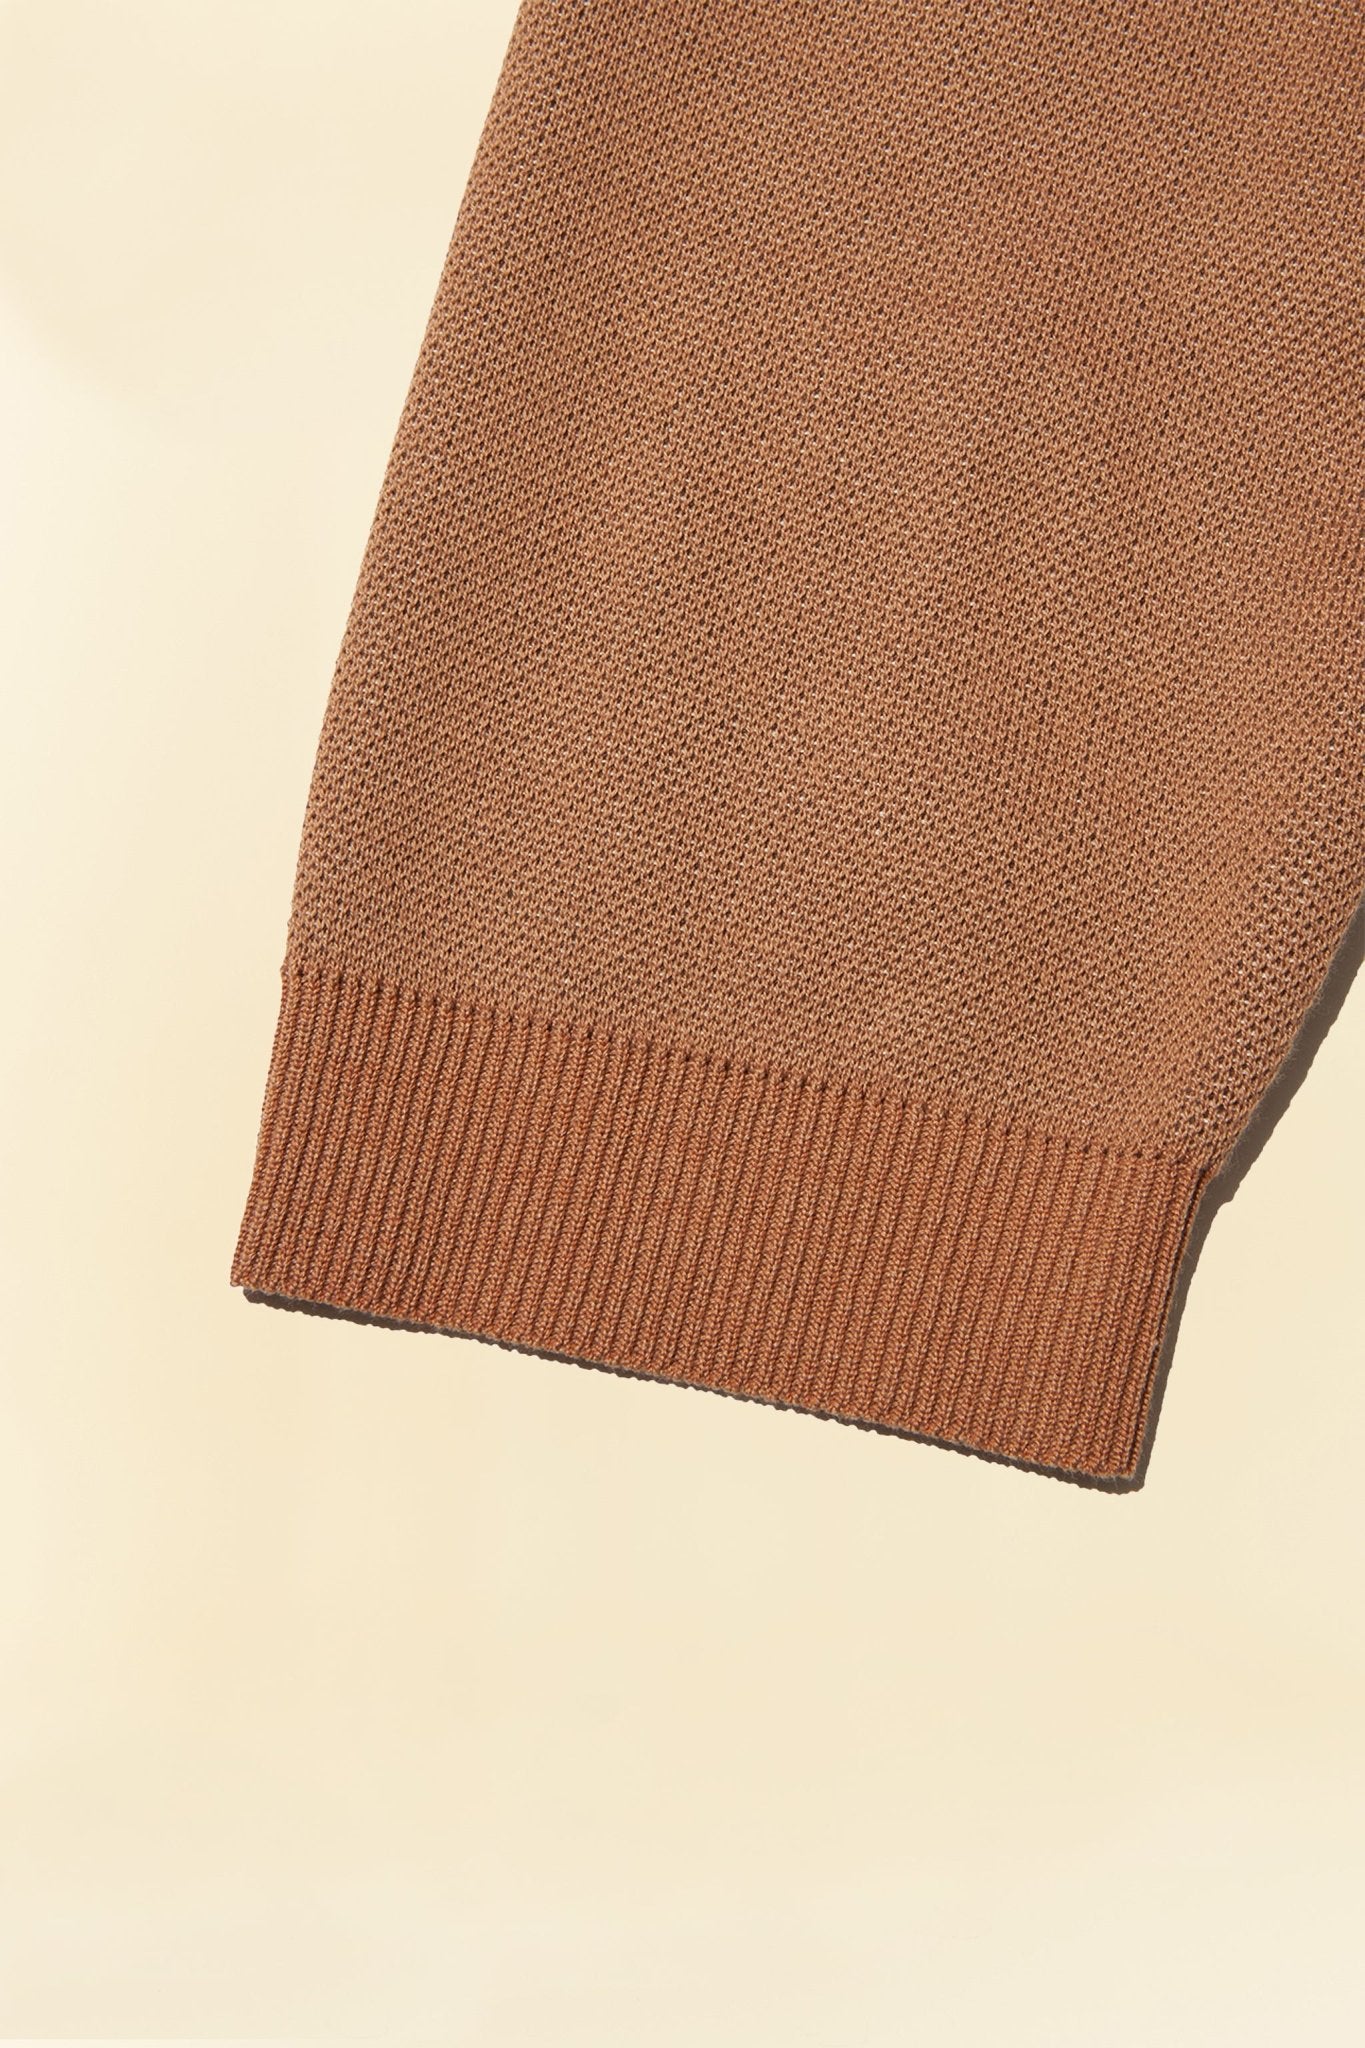 Radiall Curtis Knit Sweater - Brown -Radiall - URAHARA